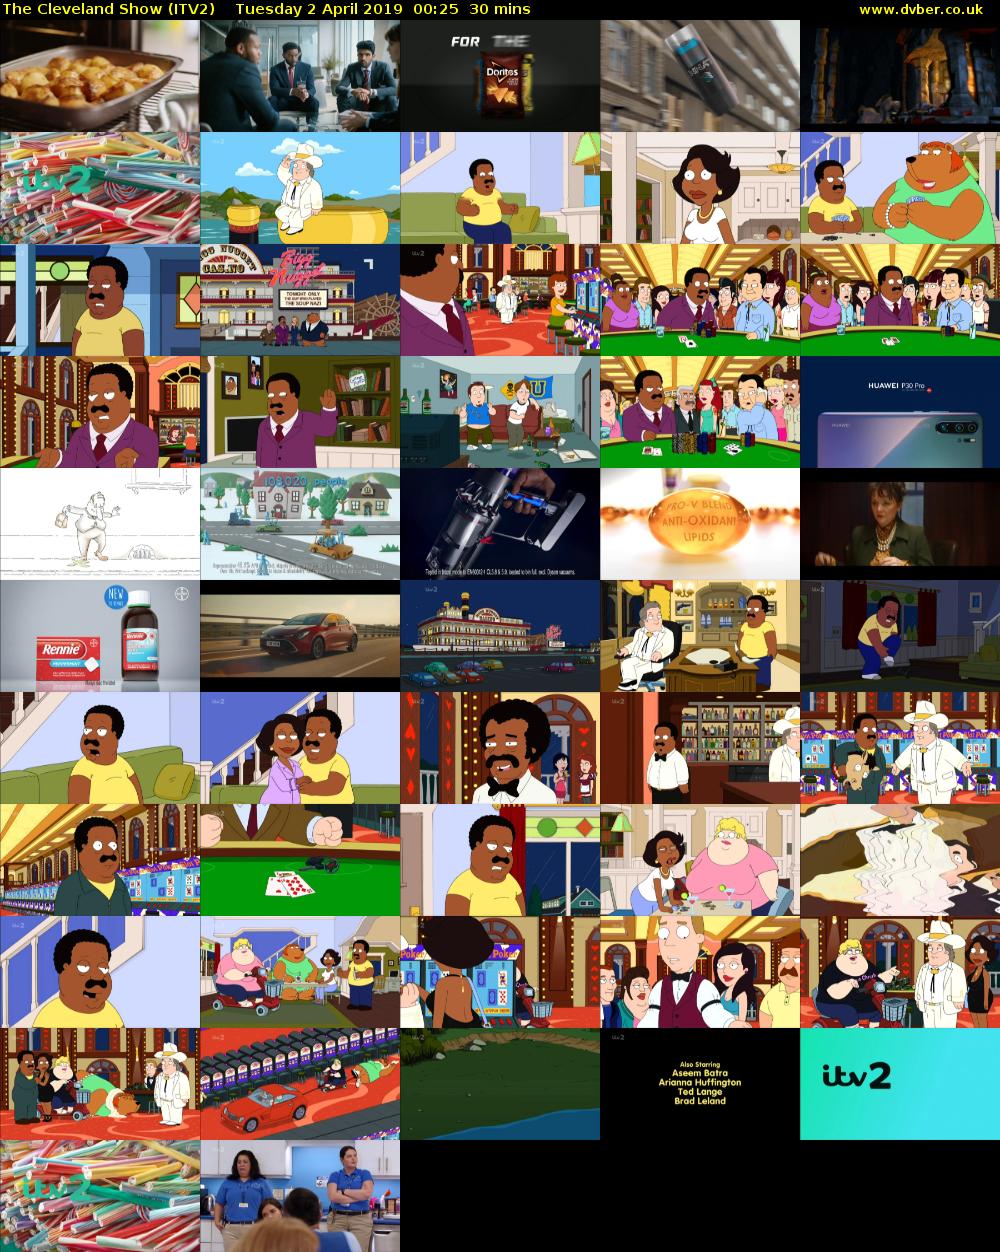 The Cleveland Show (ITV2) Tuesday 2 April 2019 00:25 - 00:55